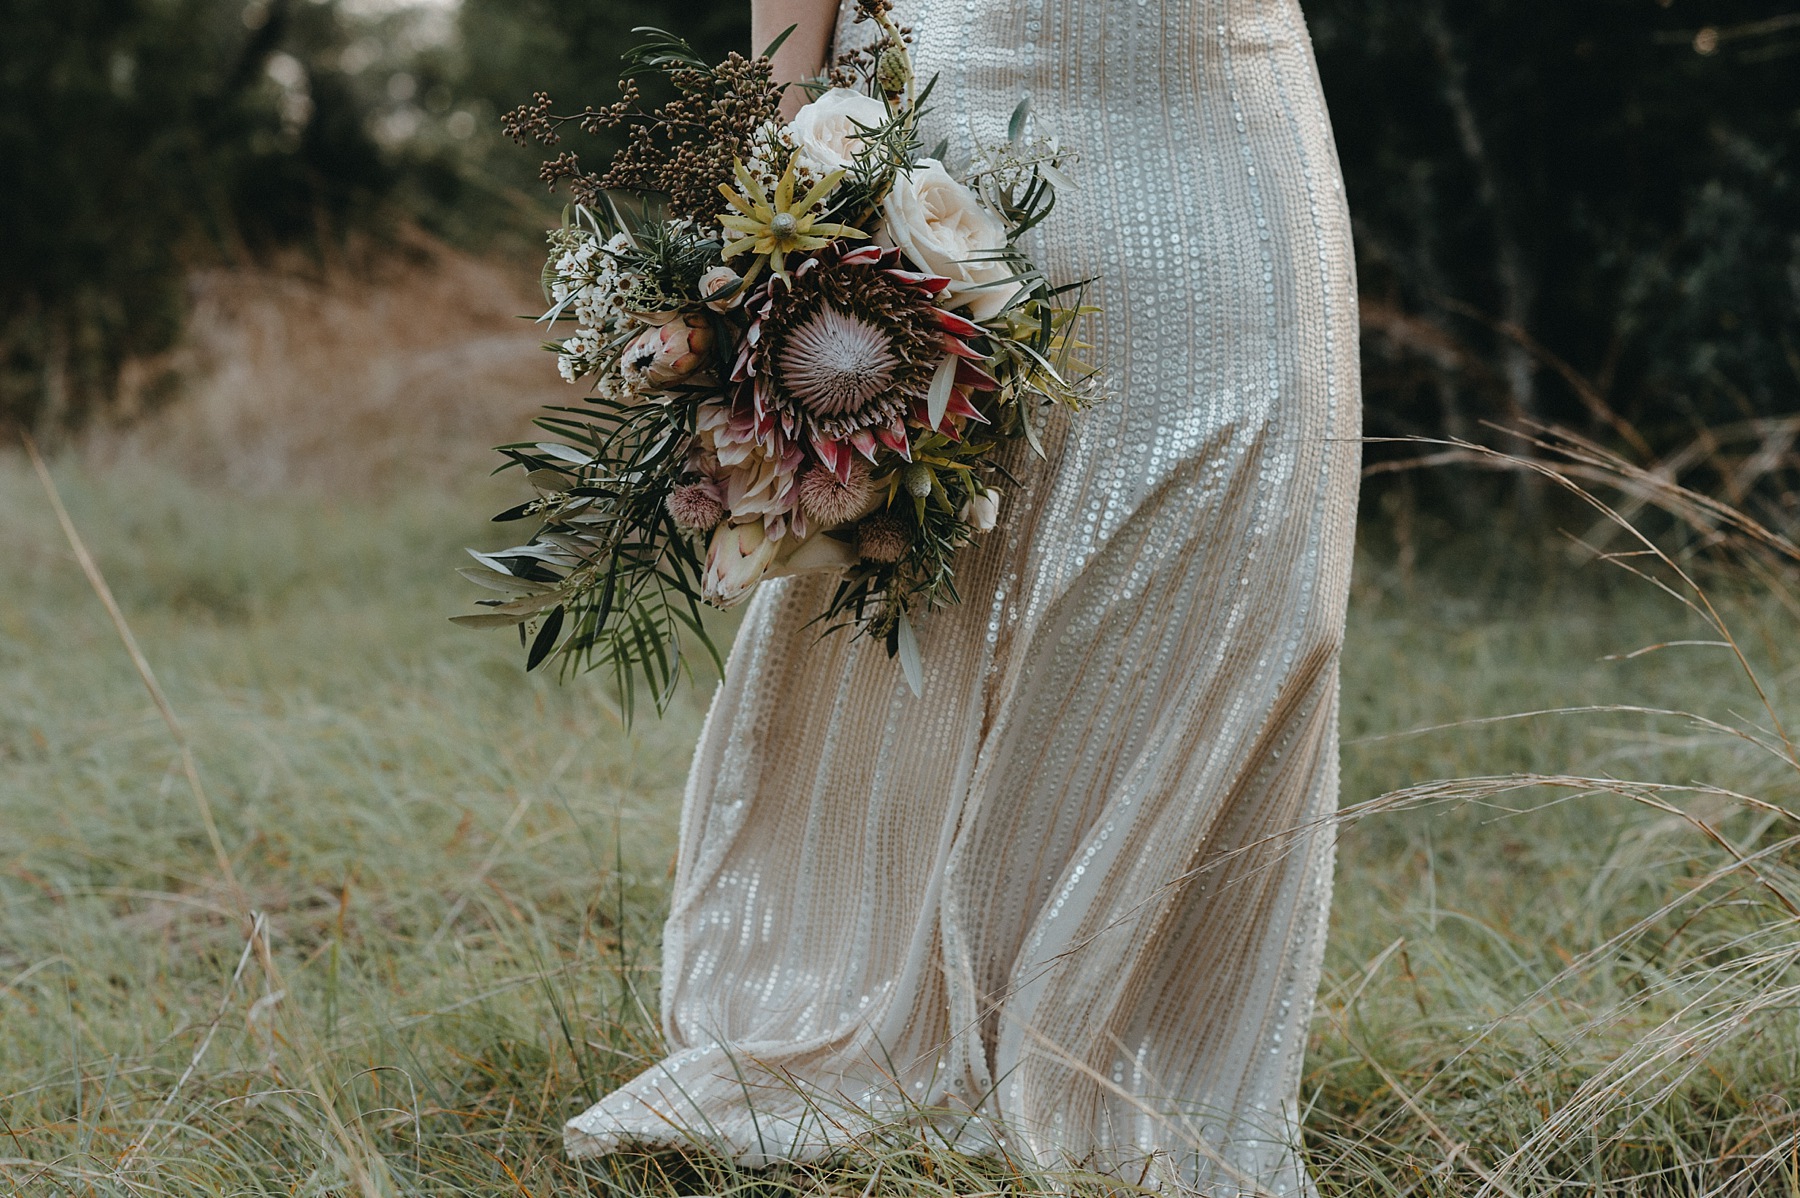  Bohemian style, wildflower inspired bridal and bridesmaid bouquets with eucalyptus, protea, peonies at Vista West Ranch. Petal Pushers floral event design studio located in Dripping Springs, Texas. 